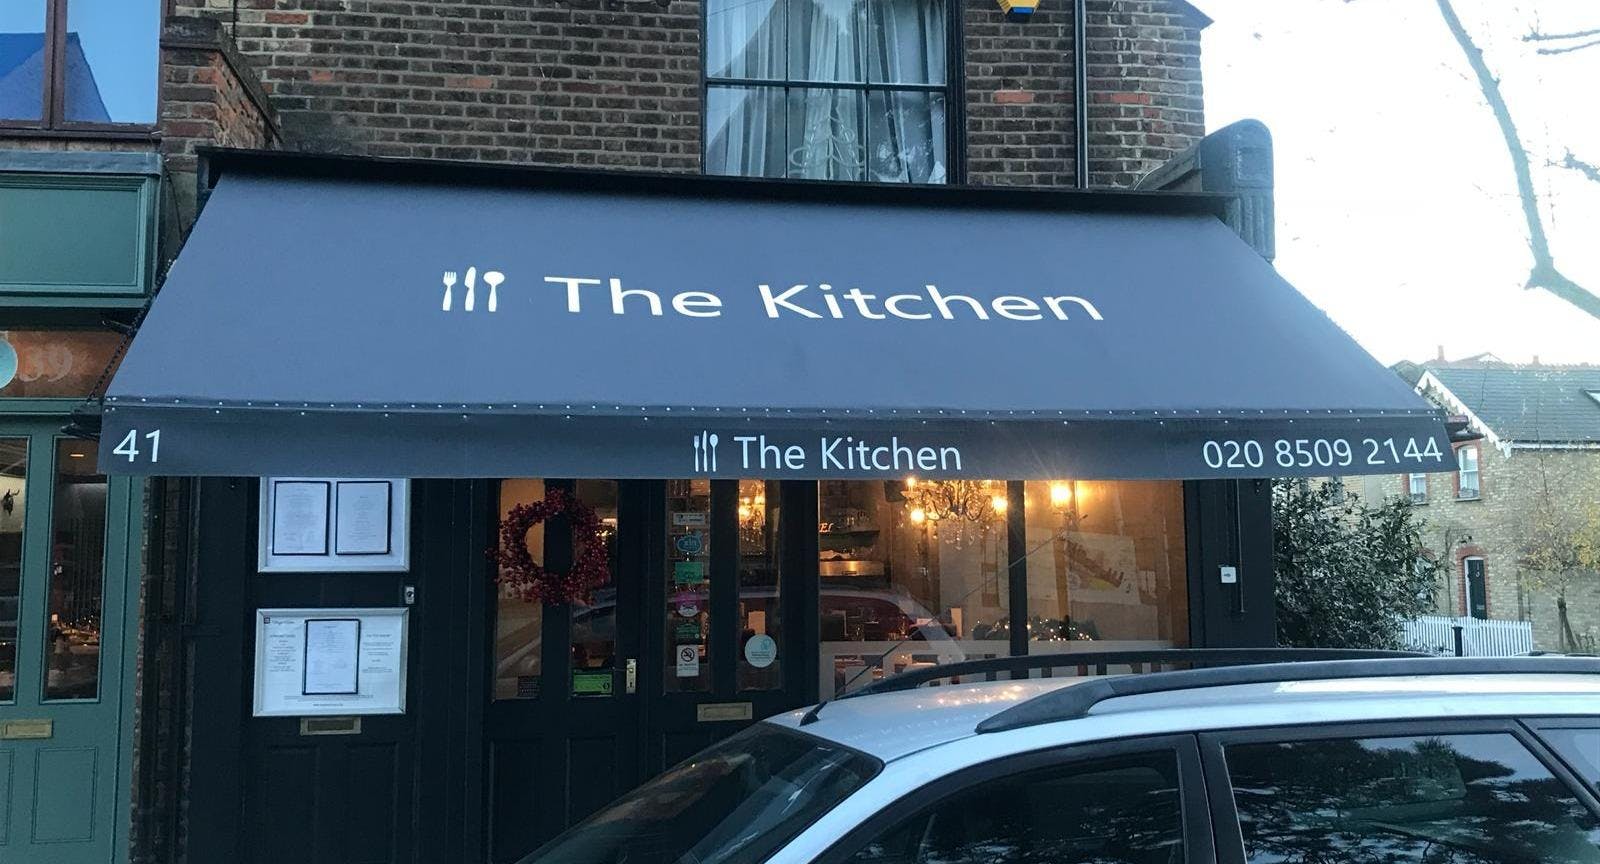 Photo of restaurant The Kitchen OLD in Walthamstow, London